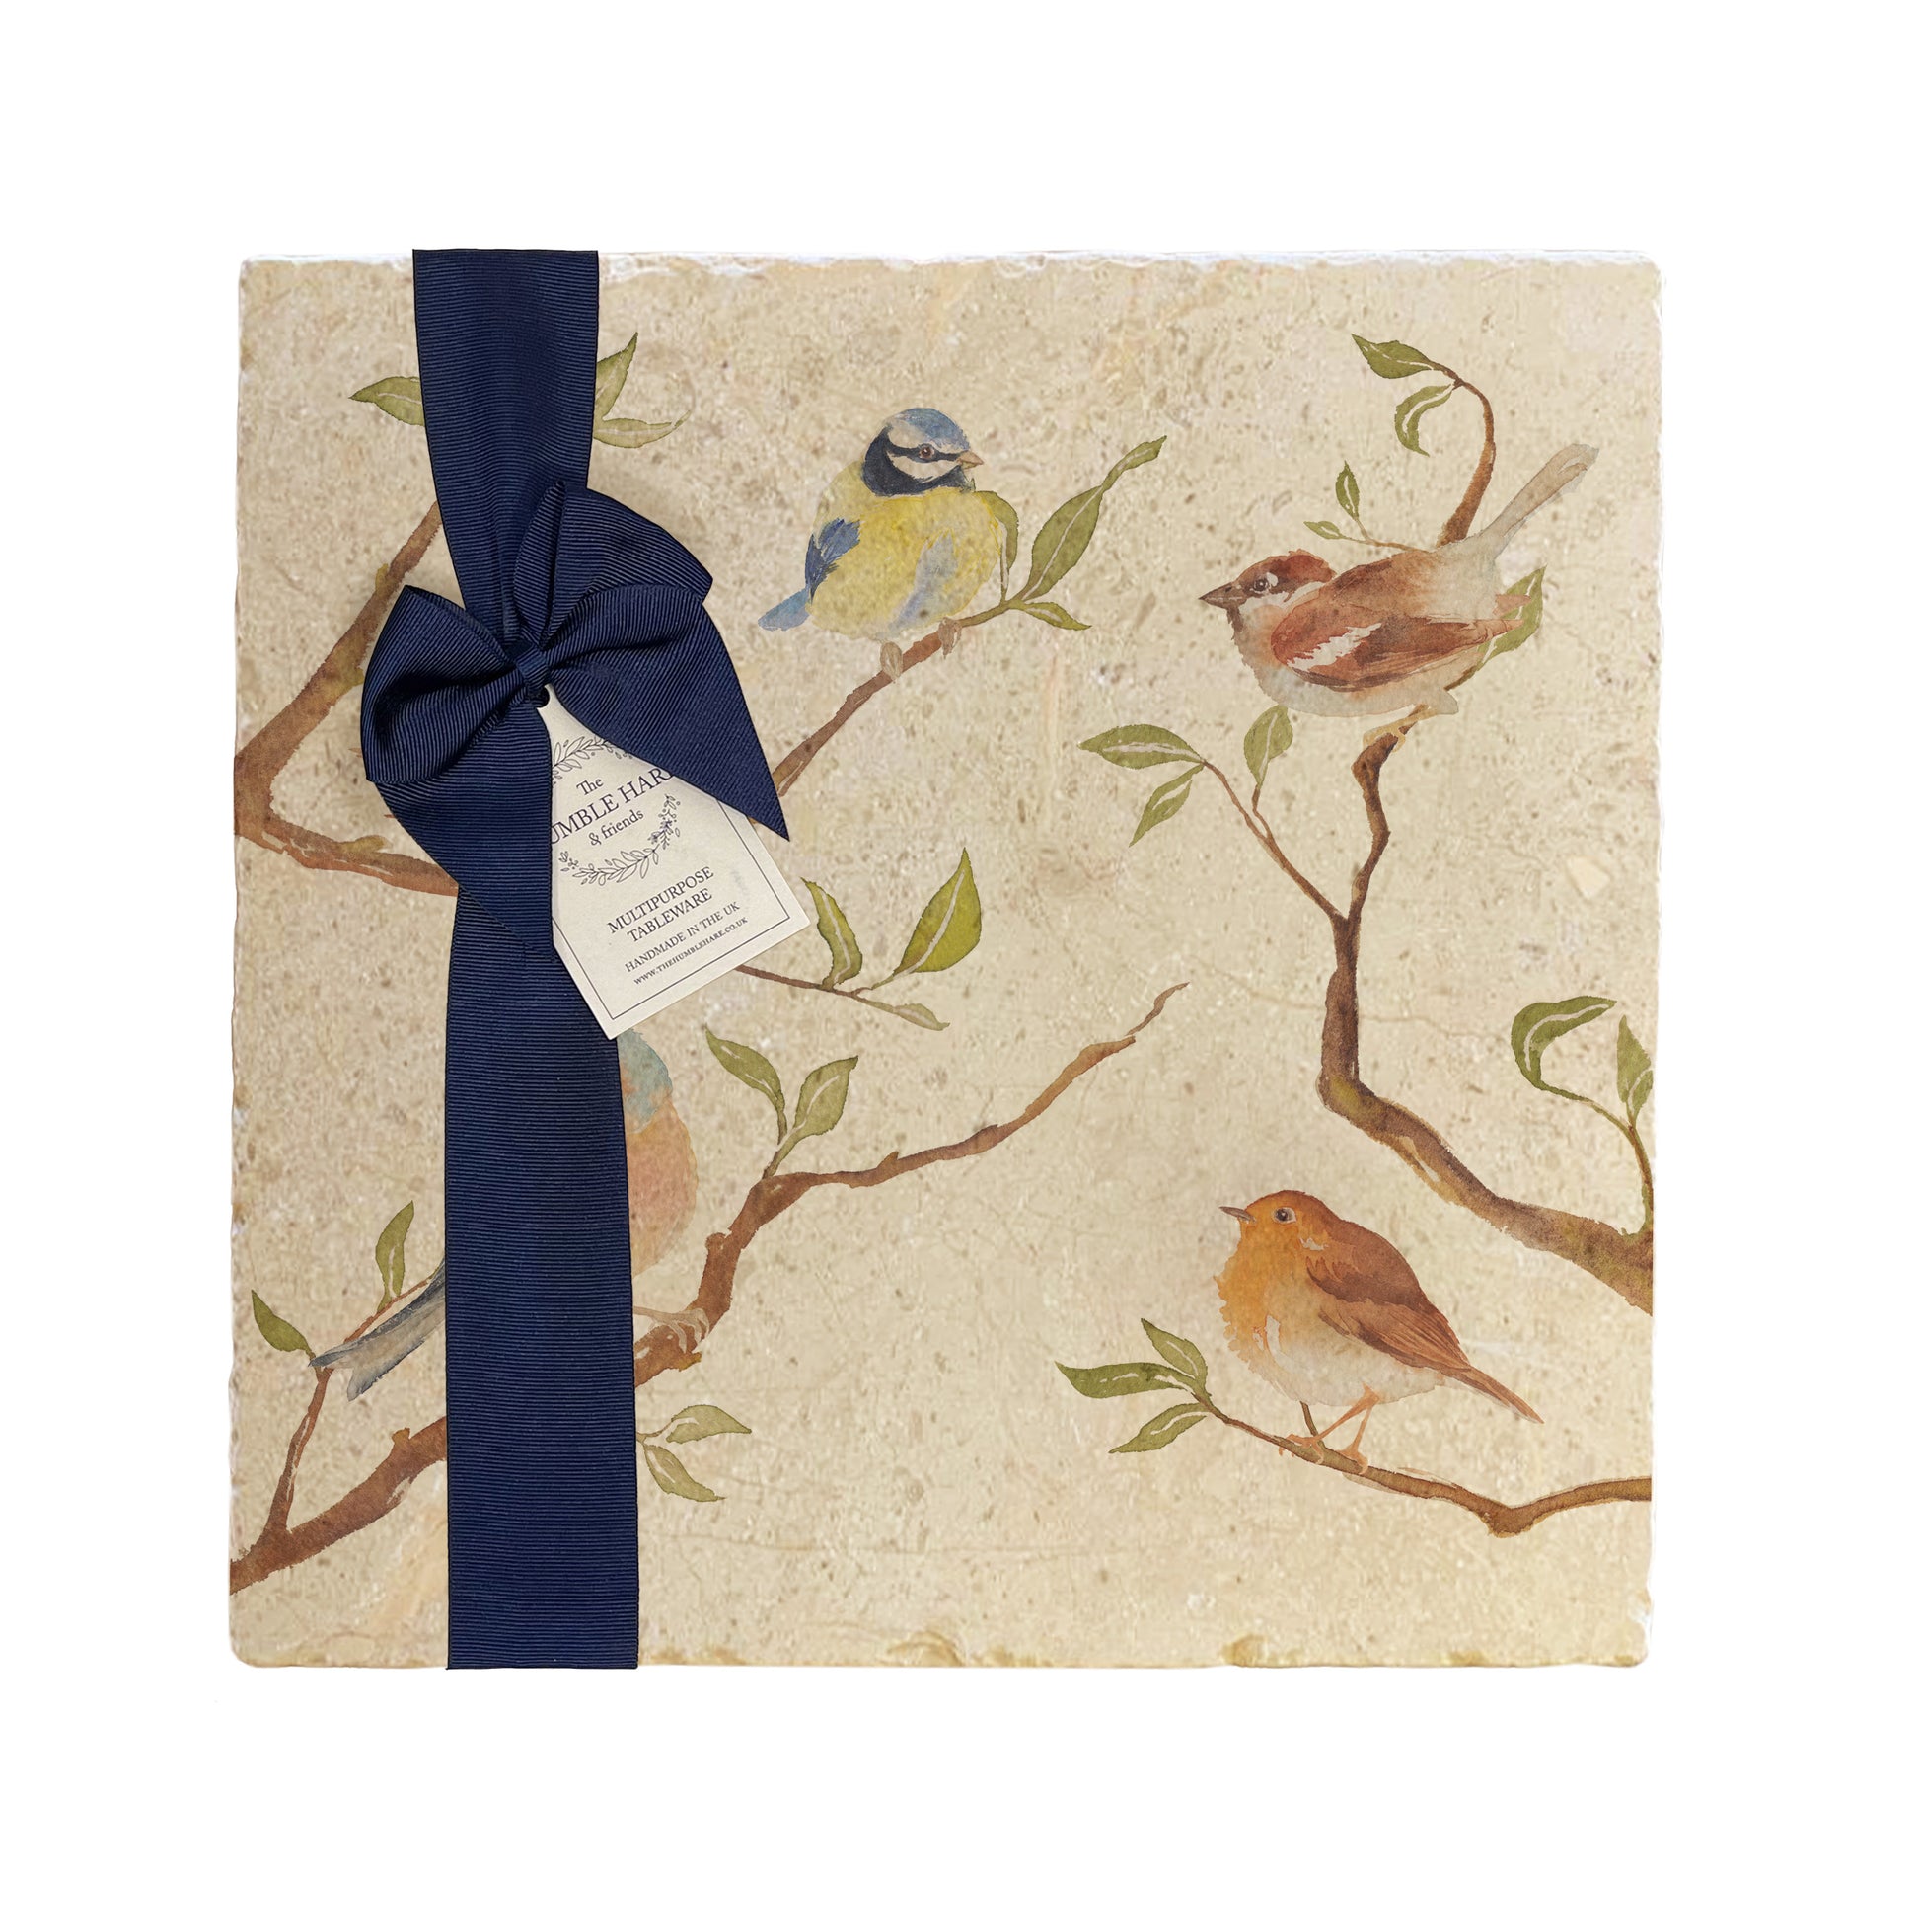 A multipurpose marble platter with a British garden birds on branches design, packaged with a luxurious dark blue bow and branded gift tag.